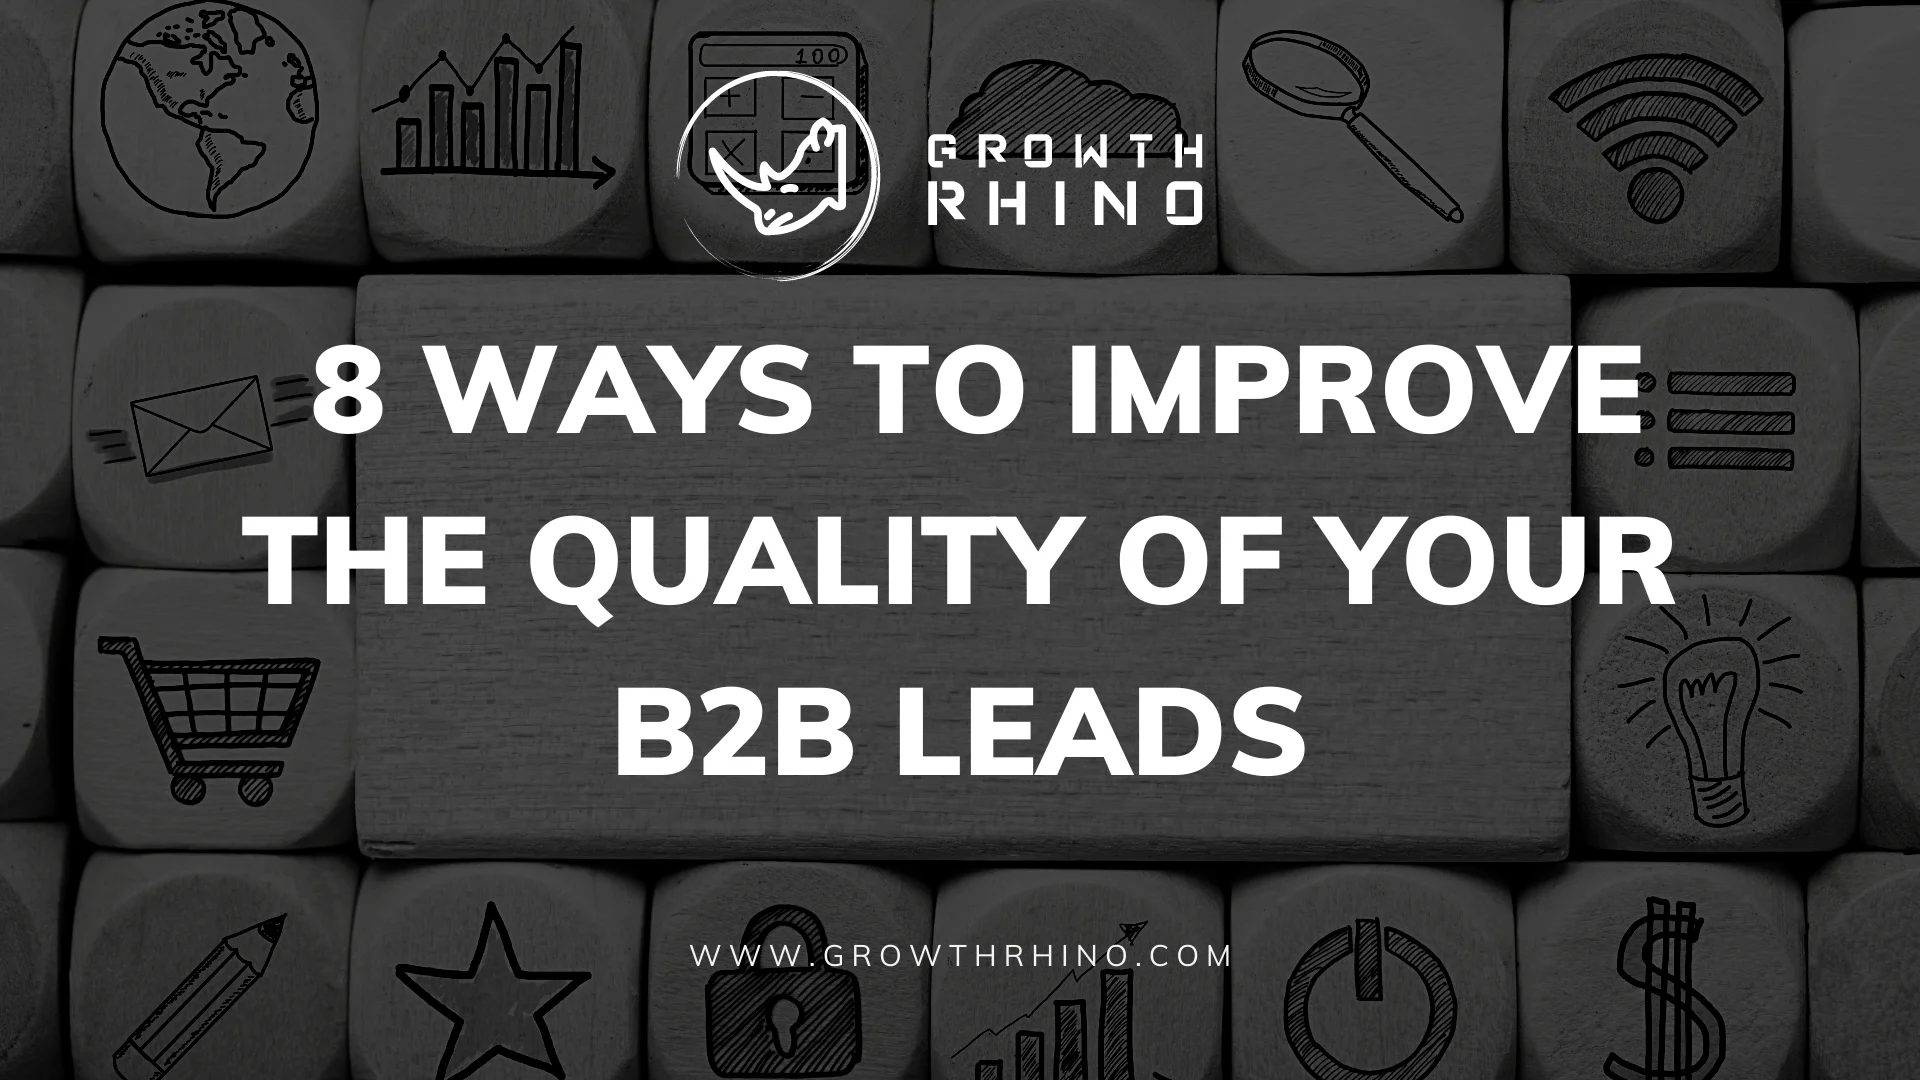  8 Ways to Improve the Quality of Your B2B Leads